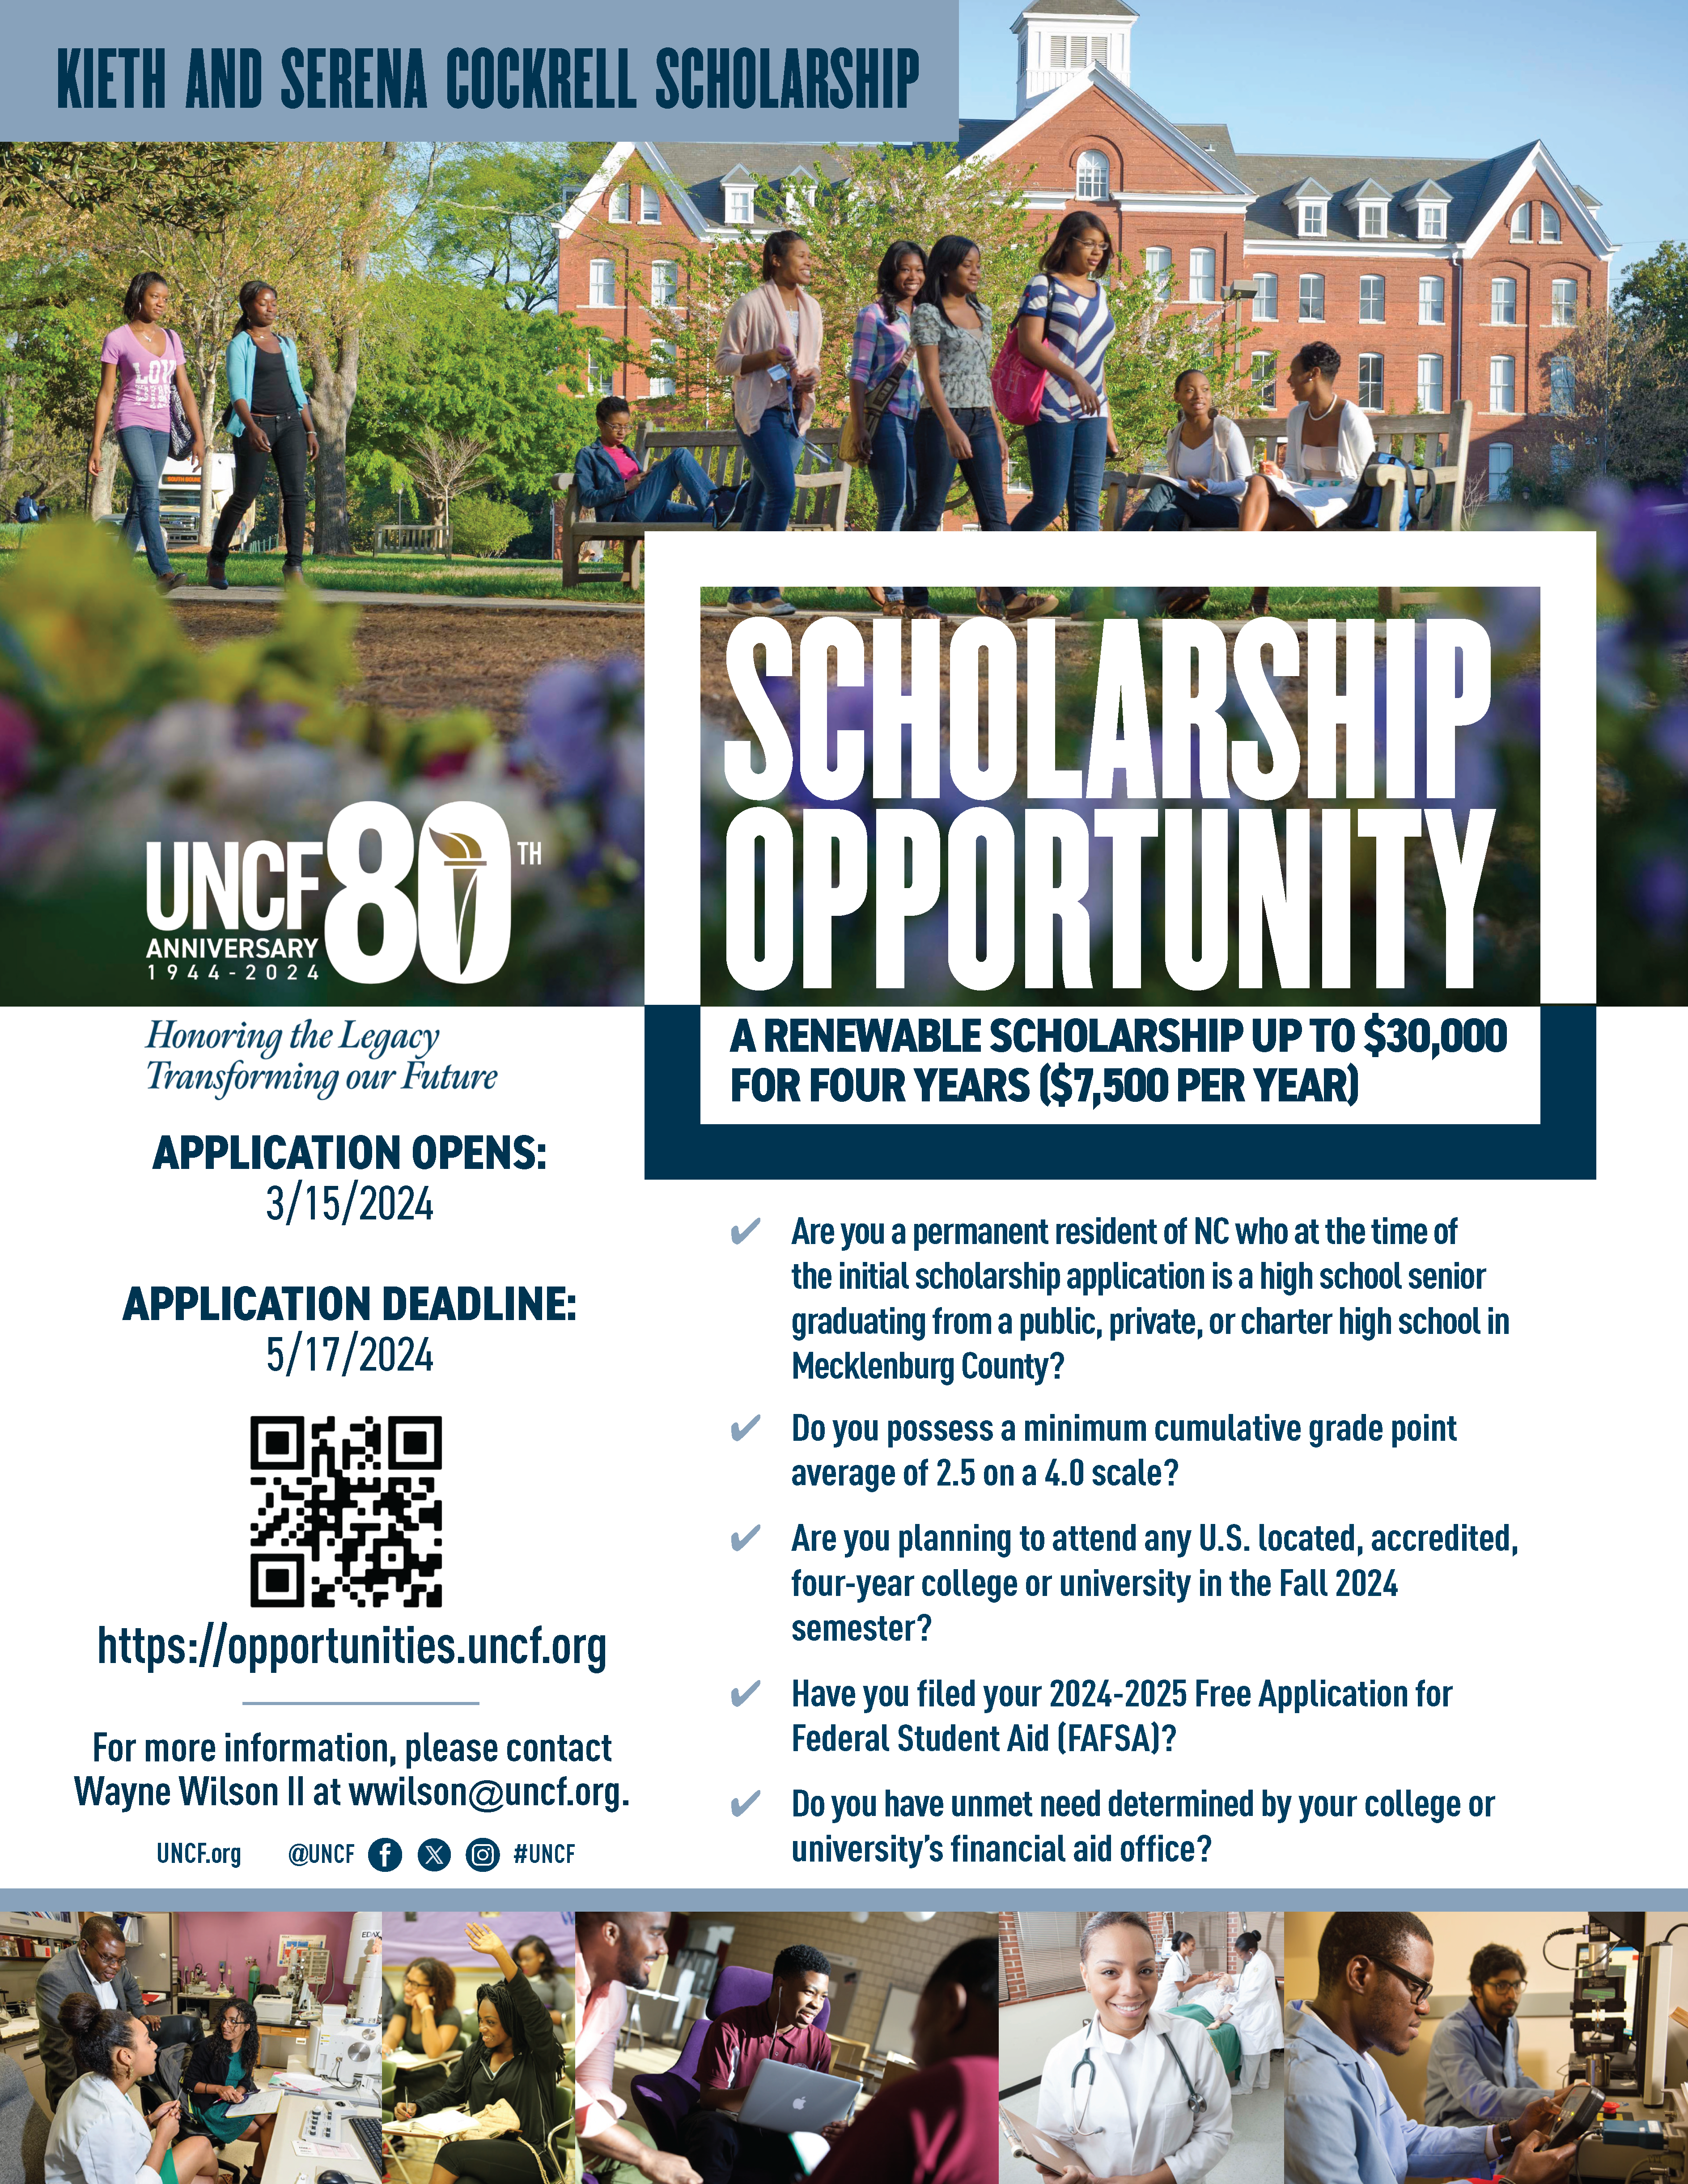 Keith and Serena Cockrell Scholarship| Scholarship Opportunity A renewable scholarship up to $30,000 for four years (7,500 per year)| UNCF 80 anniversary 1944-2024 Honoring Legacy Transforming our Future| Application Opens 3/15/2024| Application deadline 5/17/2024| https://opportunities.uncf.org| For more information, please contact Wayne Wilson II at wwilson@uncf.org| Are you a permanent resident of NC who at the time of the initial scholarship application is a high school senior graduating from a public, private or charter high school in Mecklenburg County?| Do you possess a minimum cumulative grade point average of 2.5 on a 4.0 scale?| Are you planning to attend any U.S located, accredited, four-year college or university in the Fall 2024 semester?| Have you filed your 2024-2025 Free Application for Federal Student Aid (FAFSA)?| Do you have unmet need determined by your college or university's financial aid office?